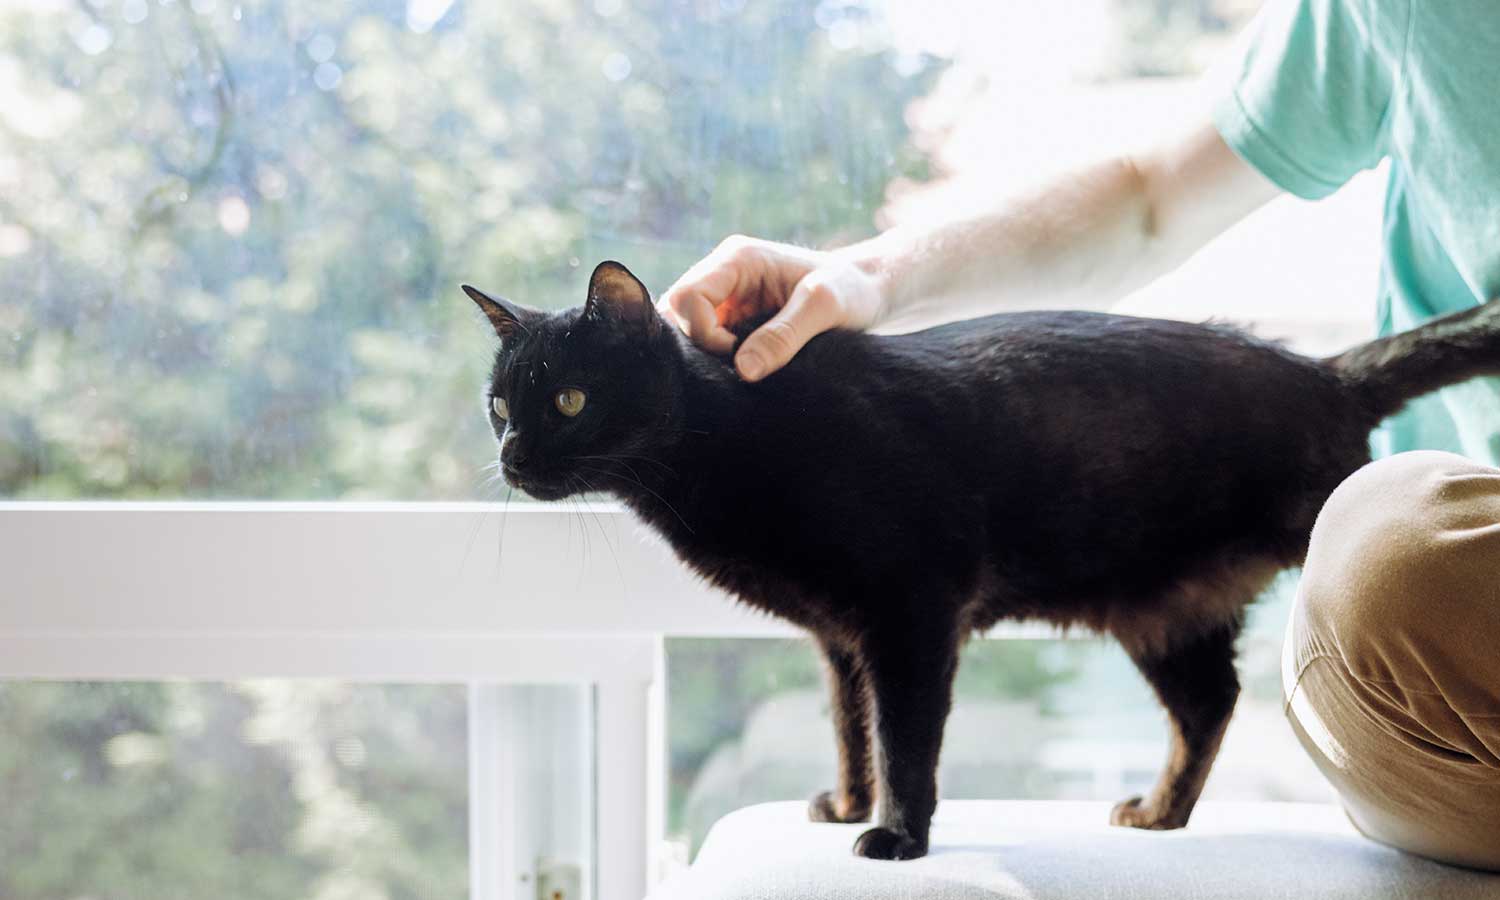 A black cat being petted